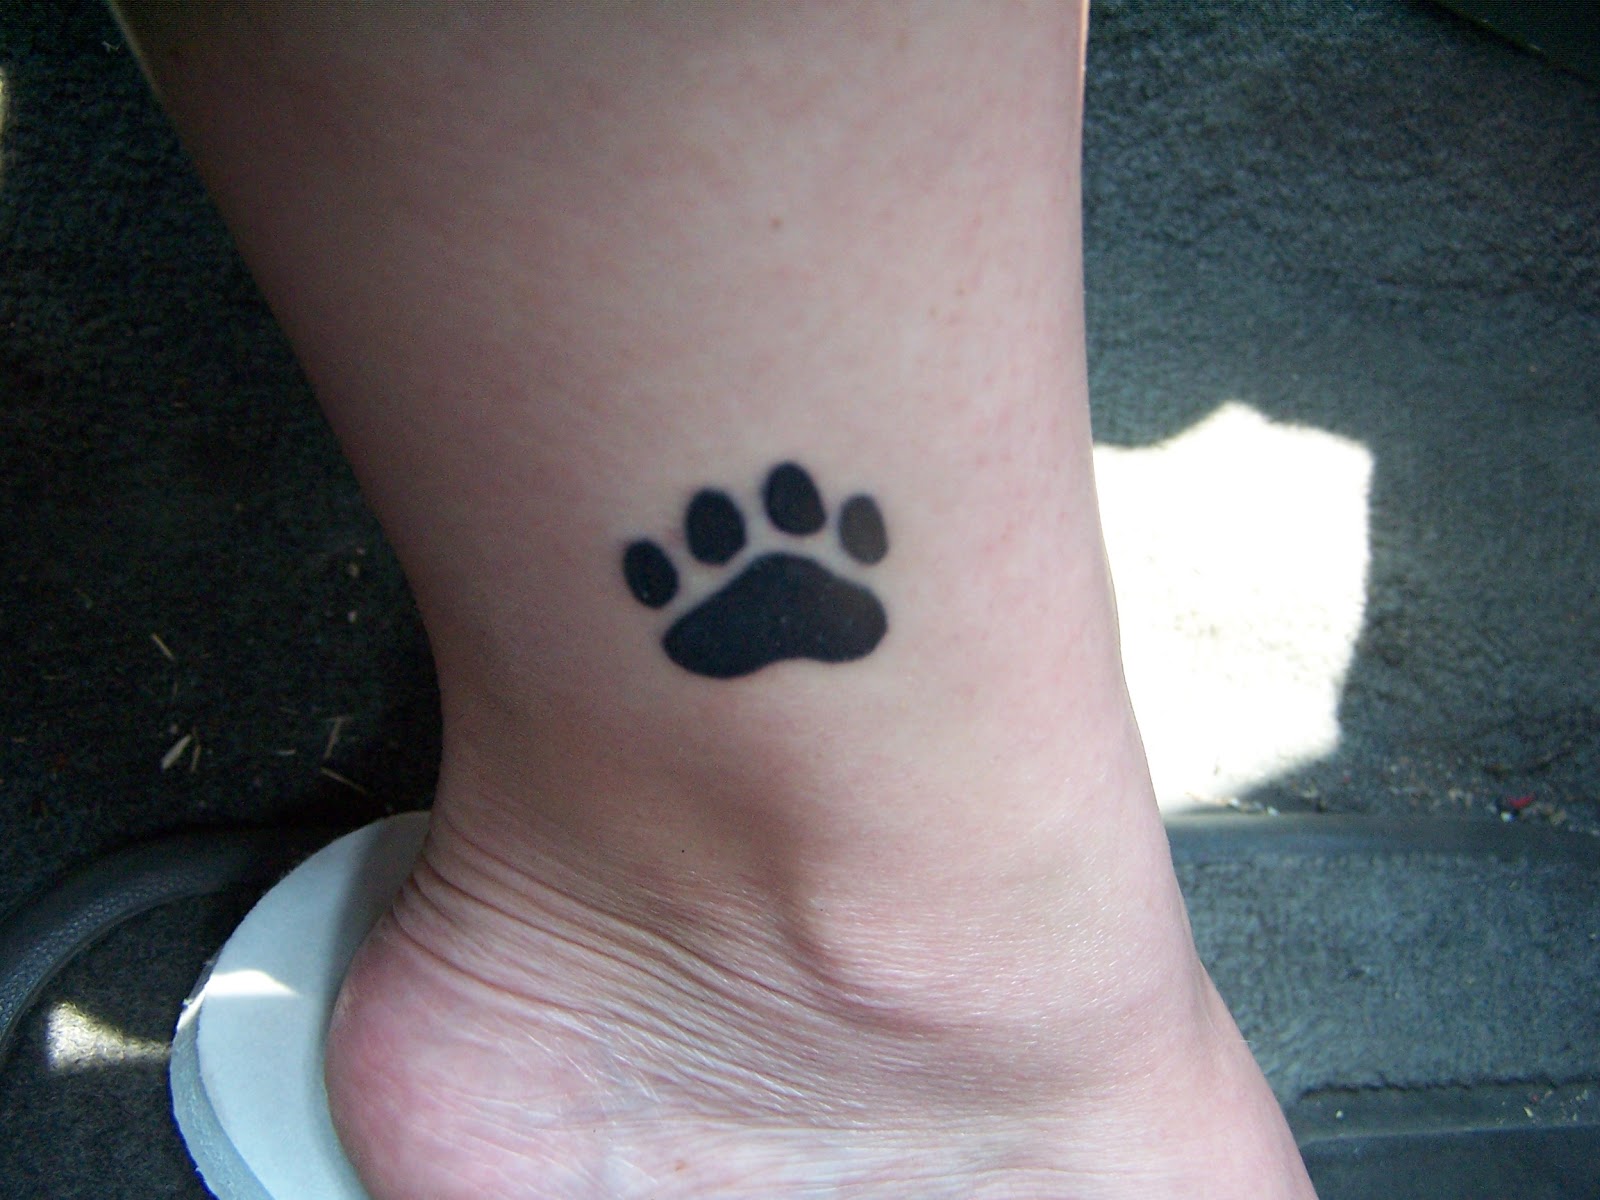 Paw Print Tattoos Designs, Ideas and Meaning